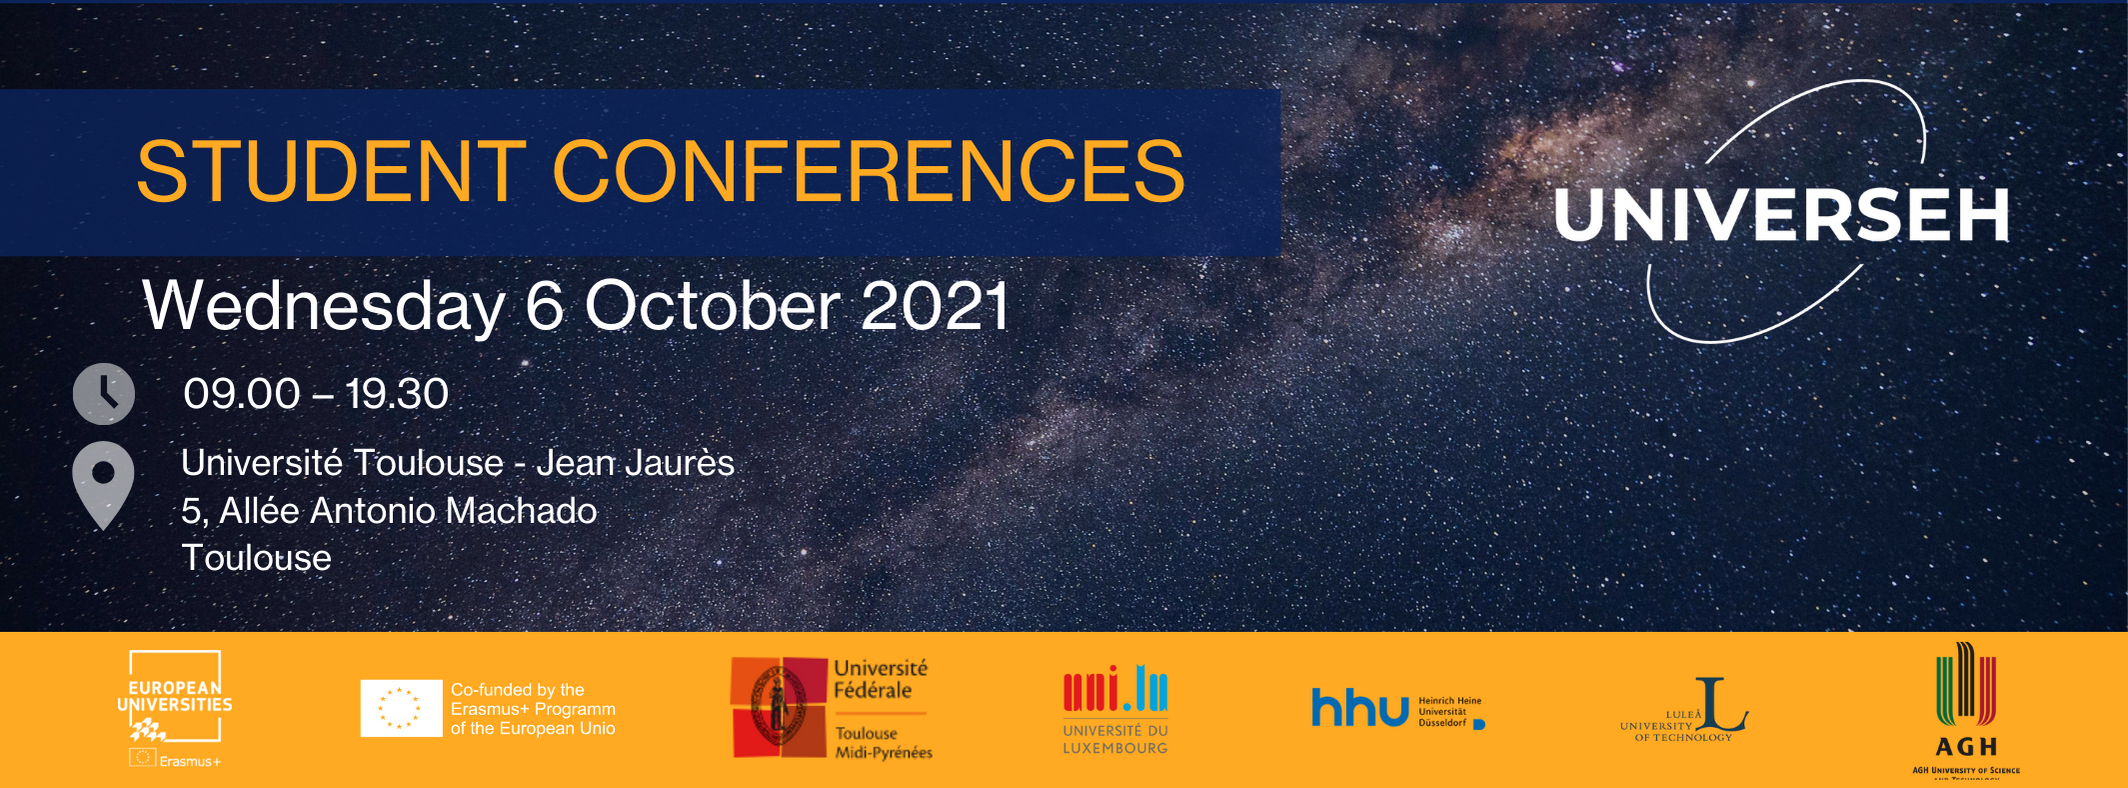 Student conferences on 6th October 2021